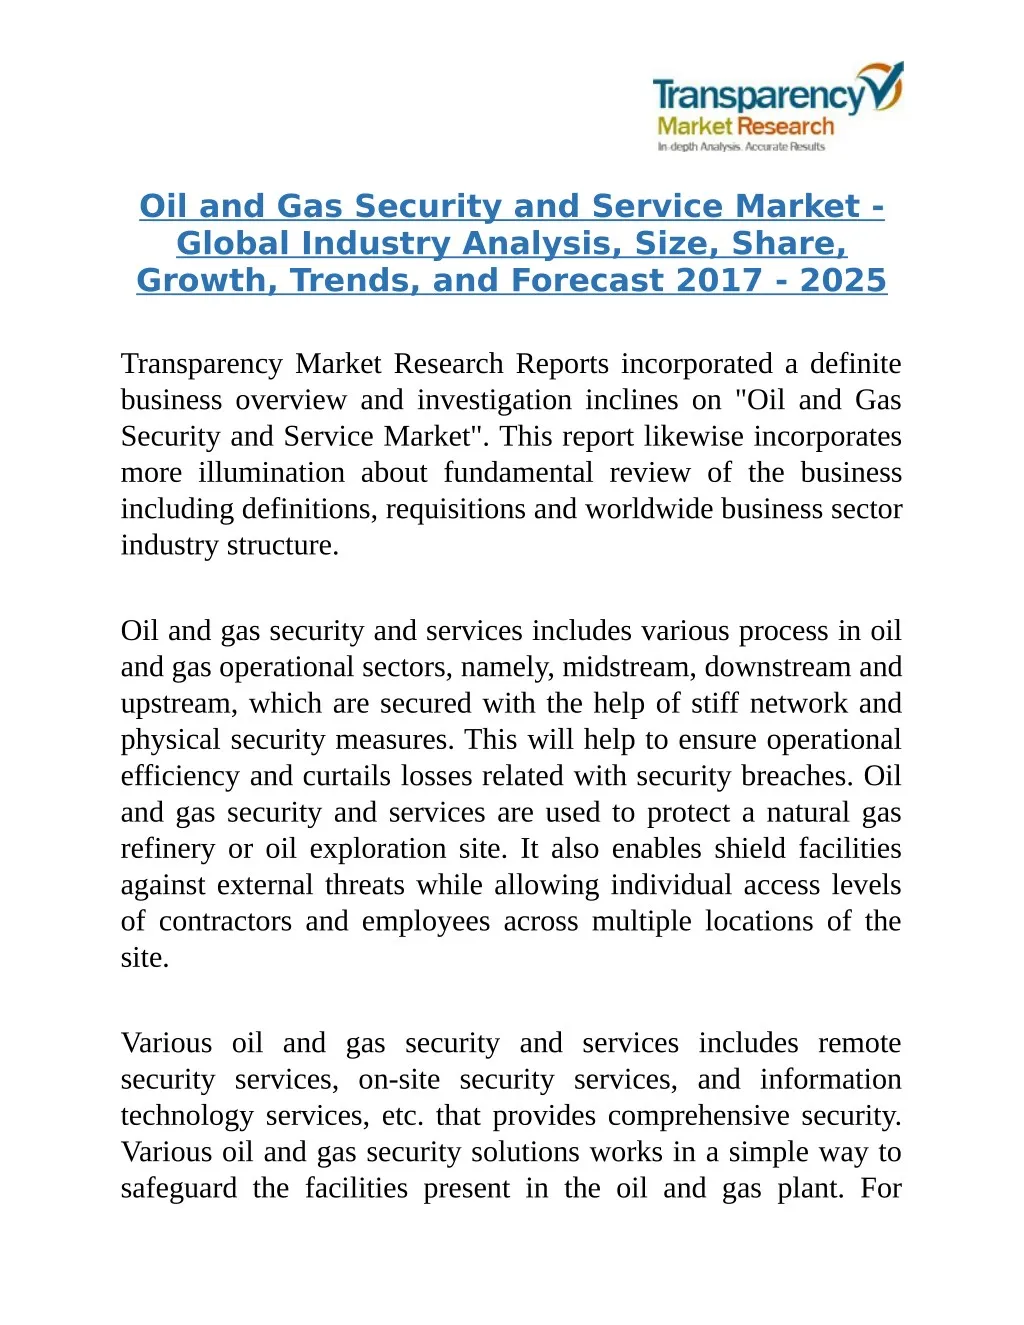 oil and gas security and service market global